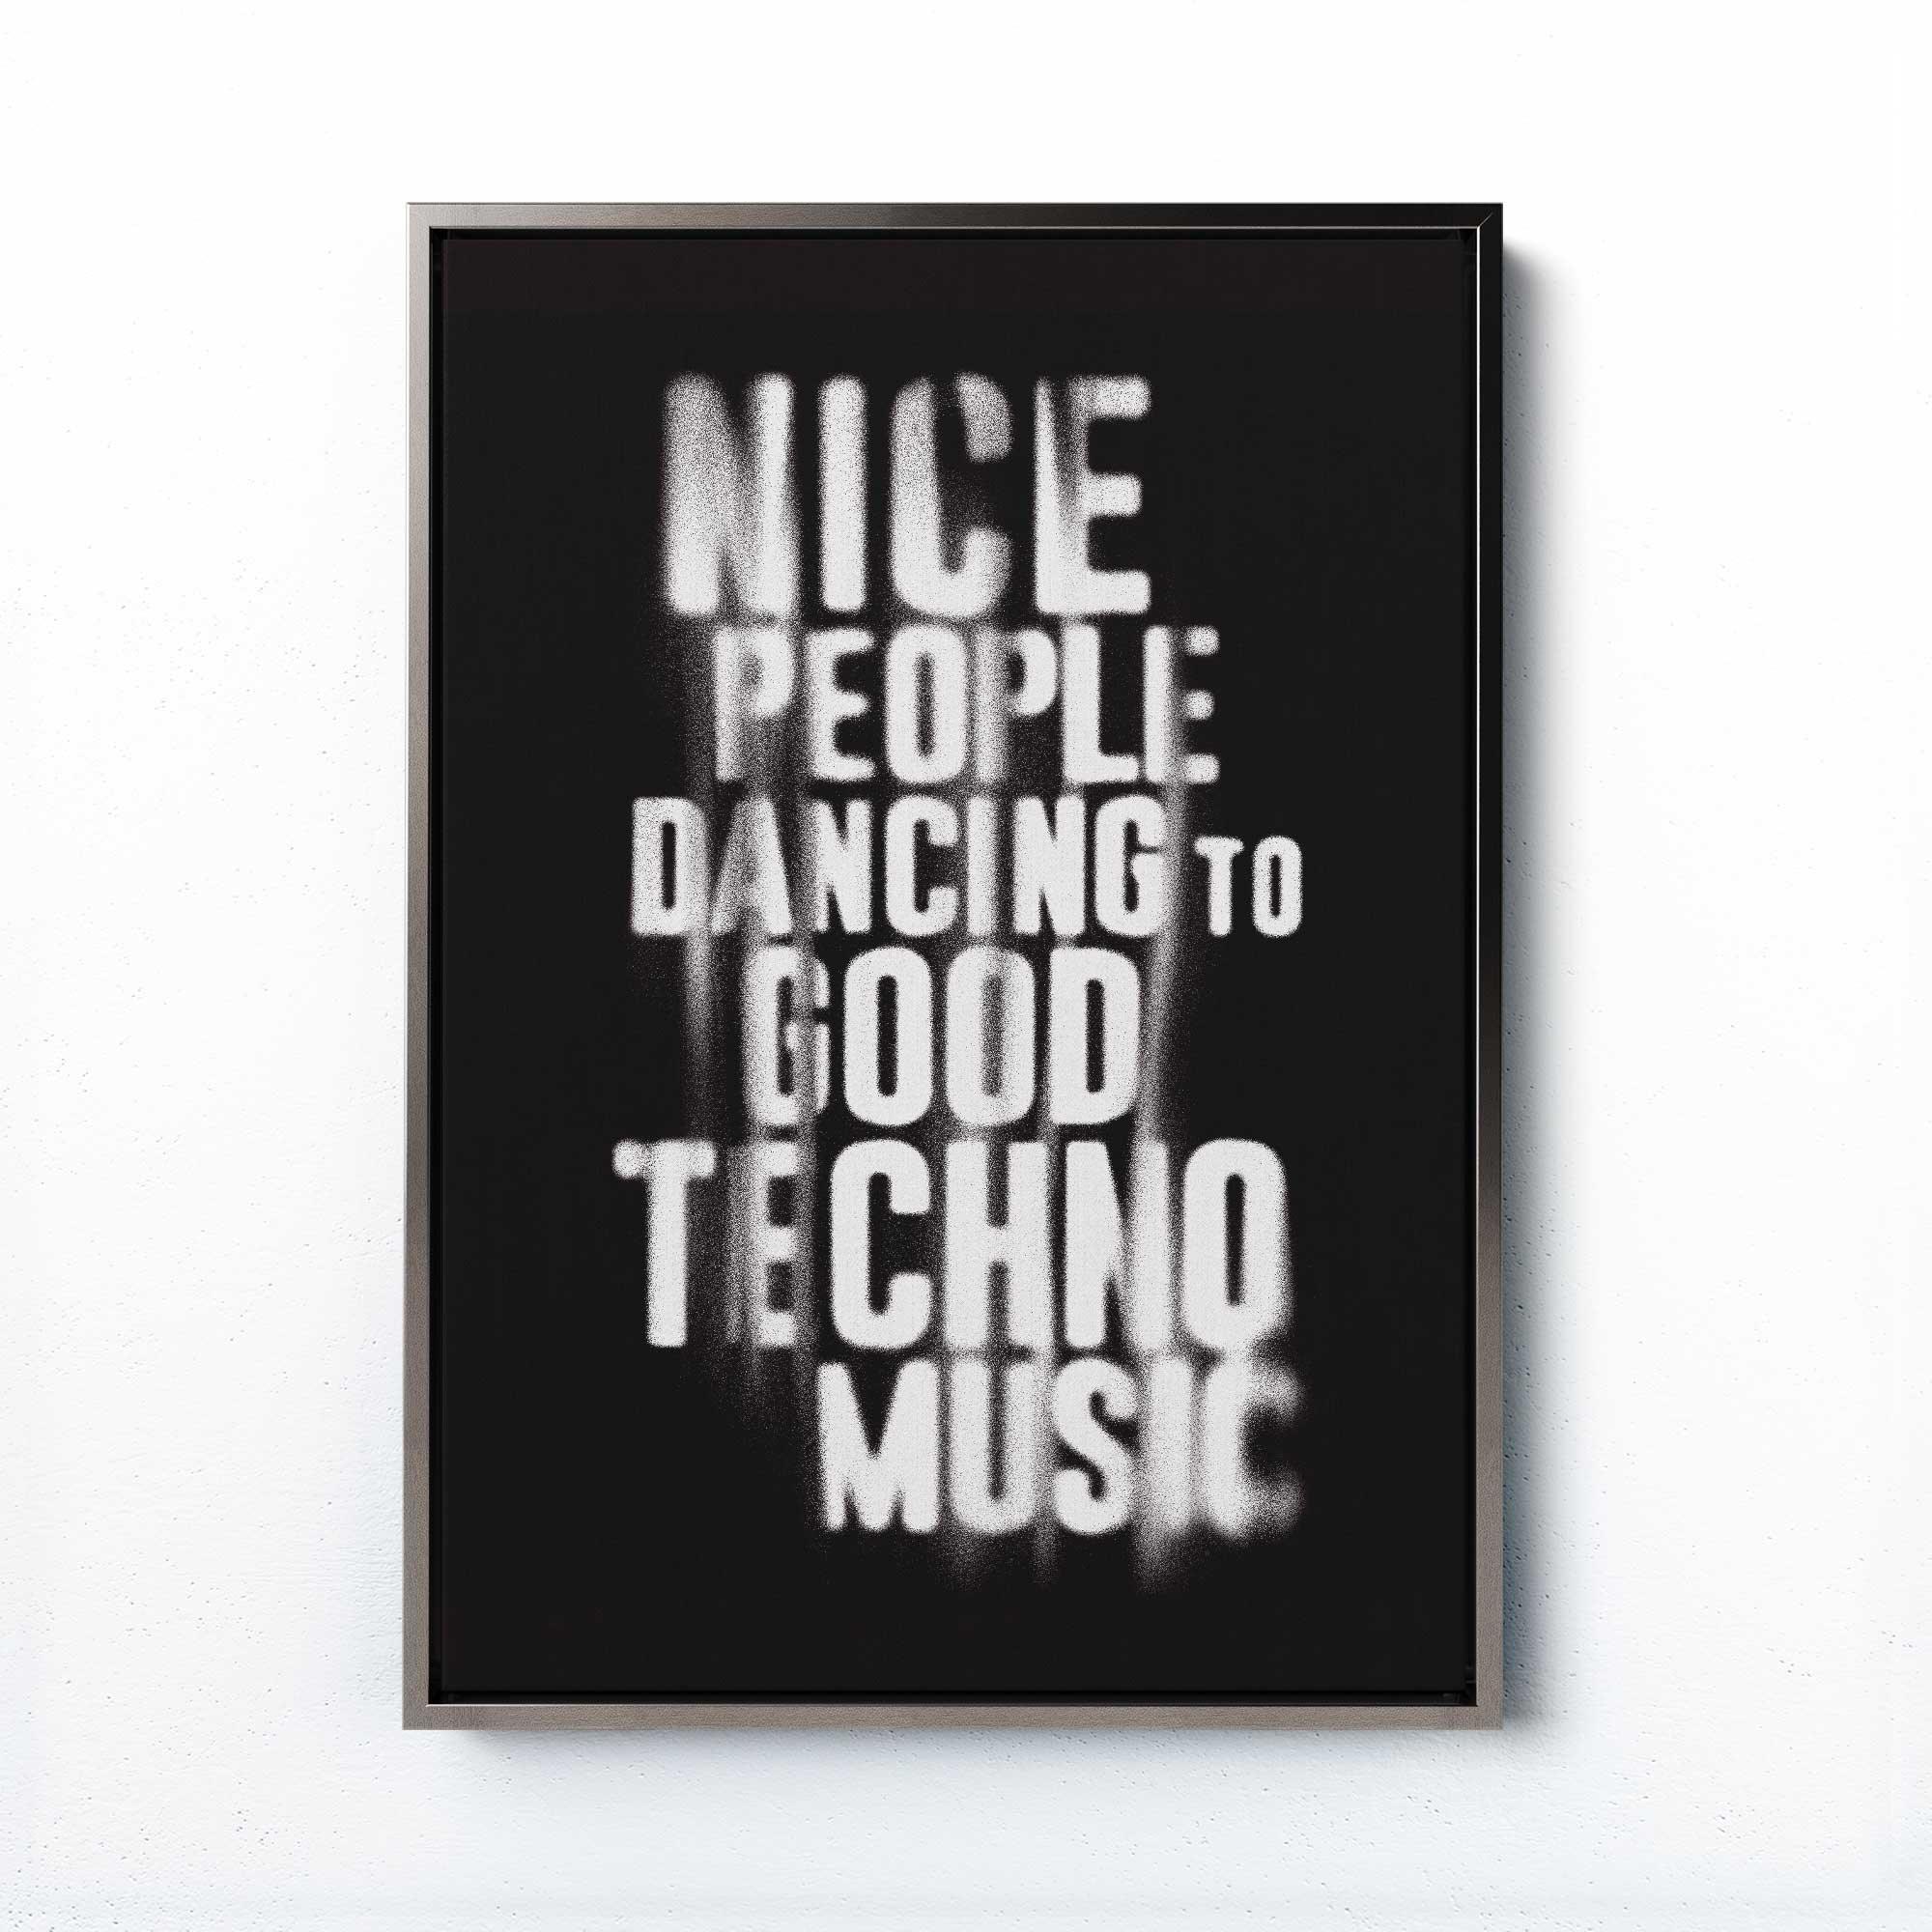 NICE PEOPLE DANCING TO GOOD TECHNO MUSIC PRINT - Afterhours Gallery 